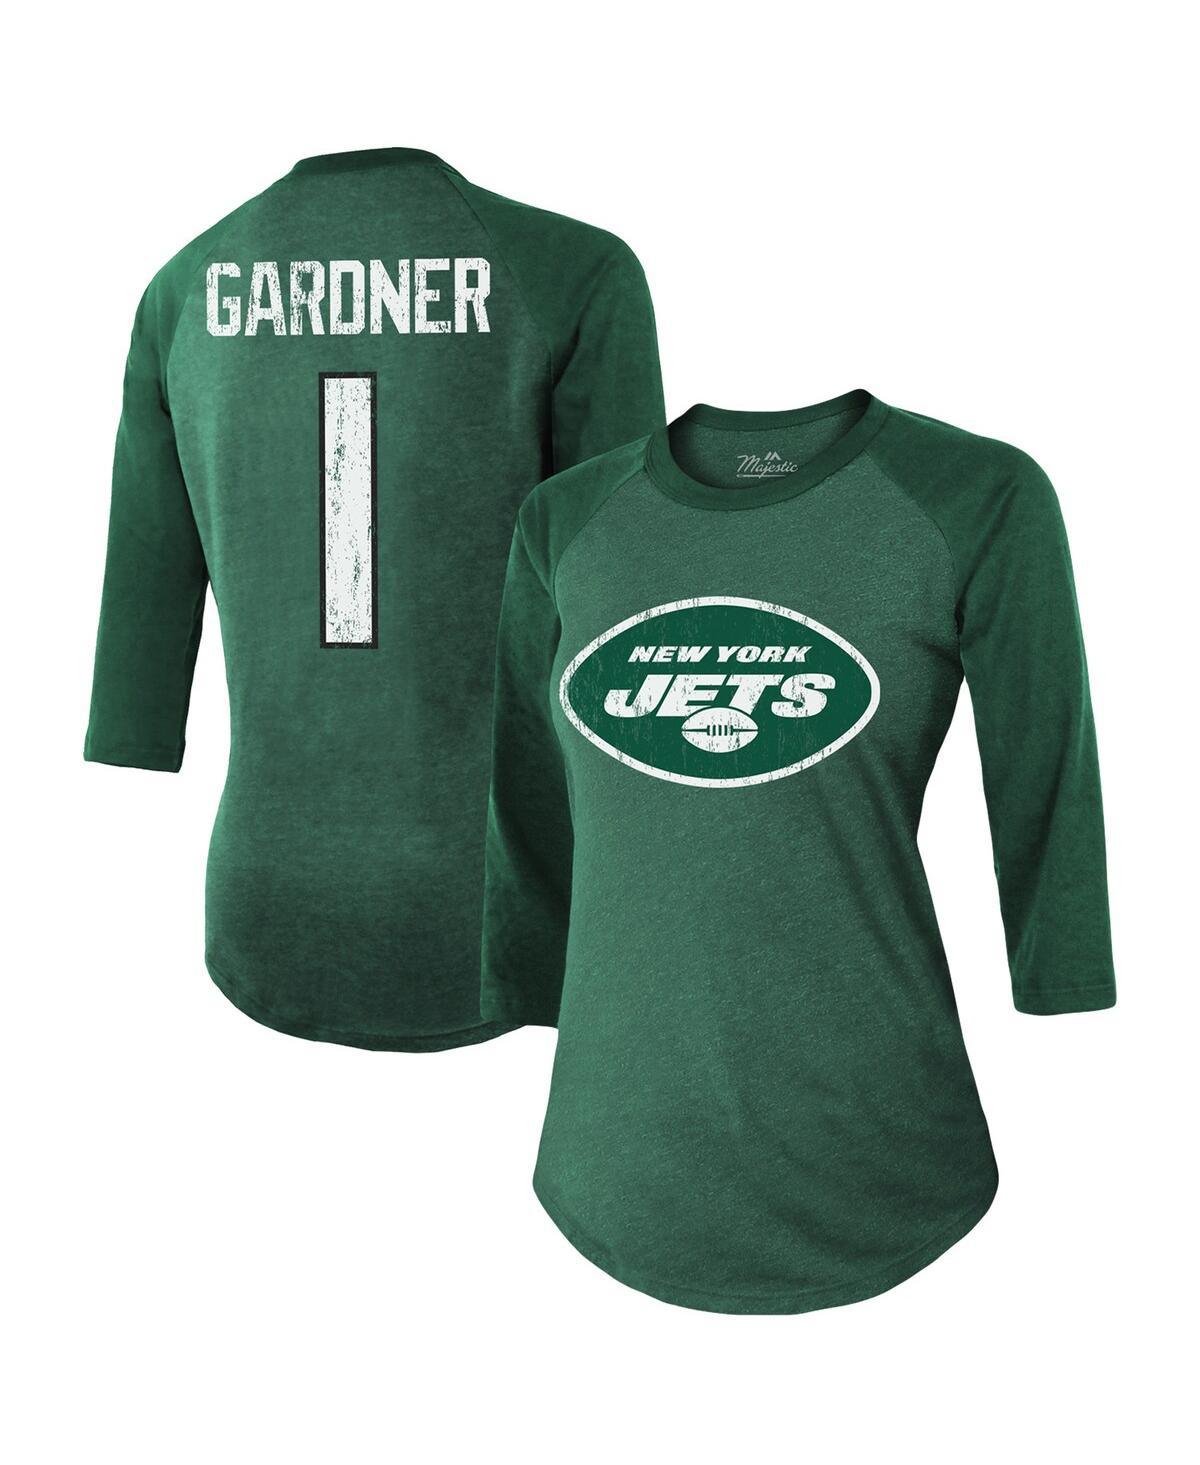 Majestic Women's  Threads Ahmad Sauce Gardner Green New York Jets Player Name And Number Tri-blend Ra